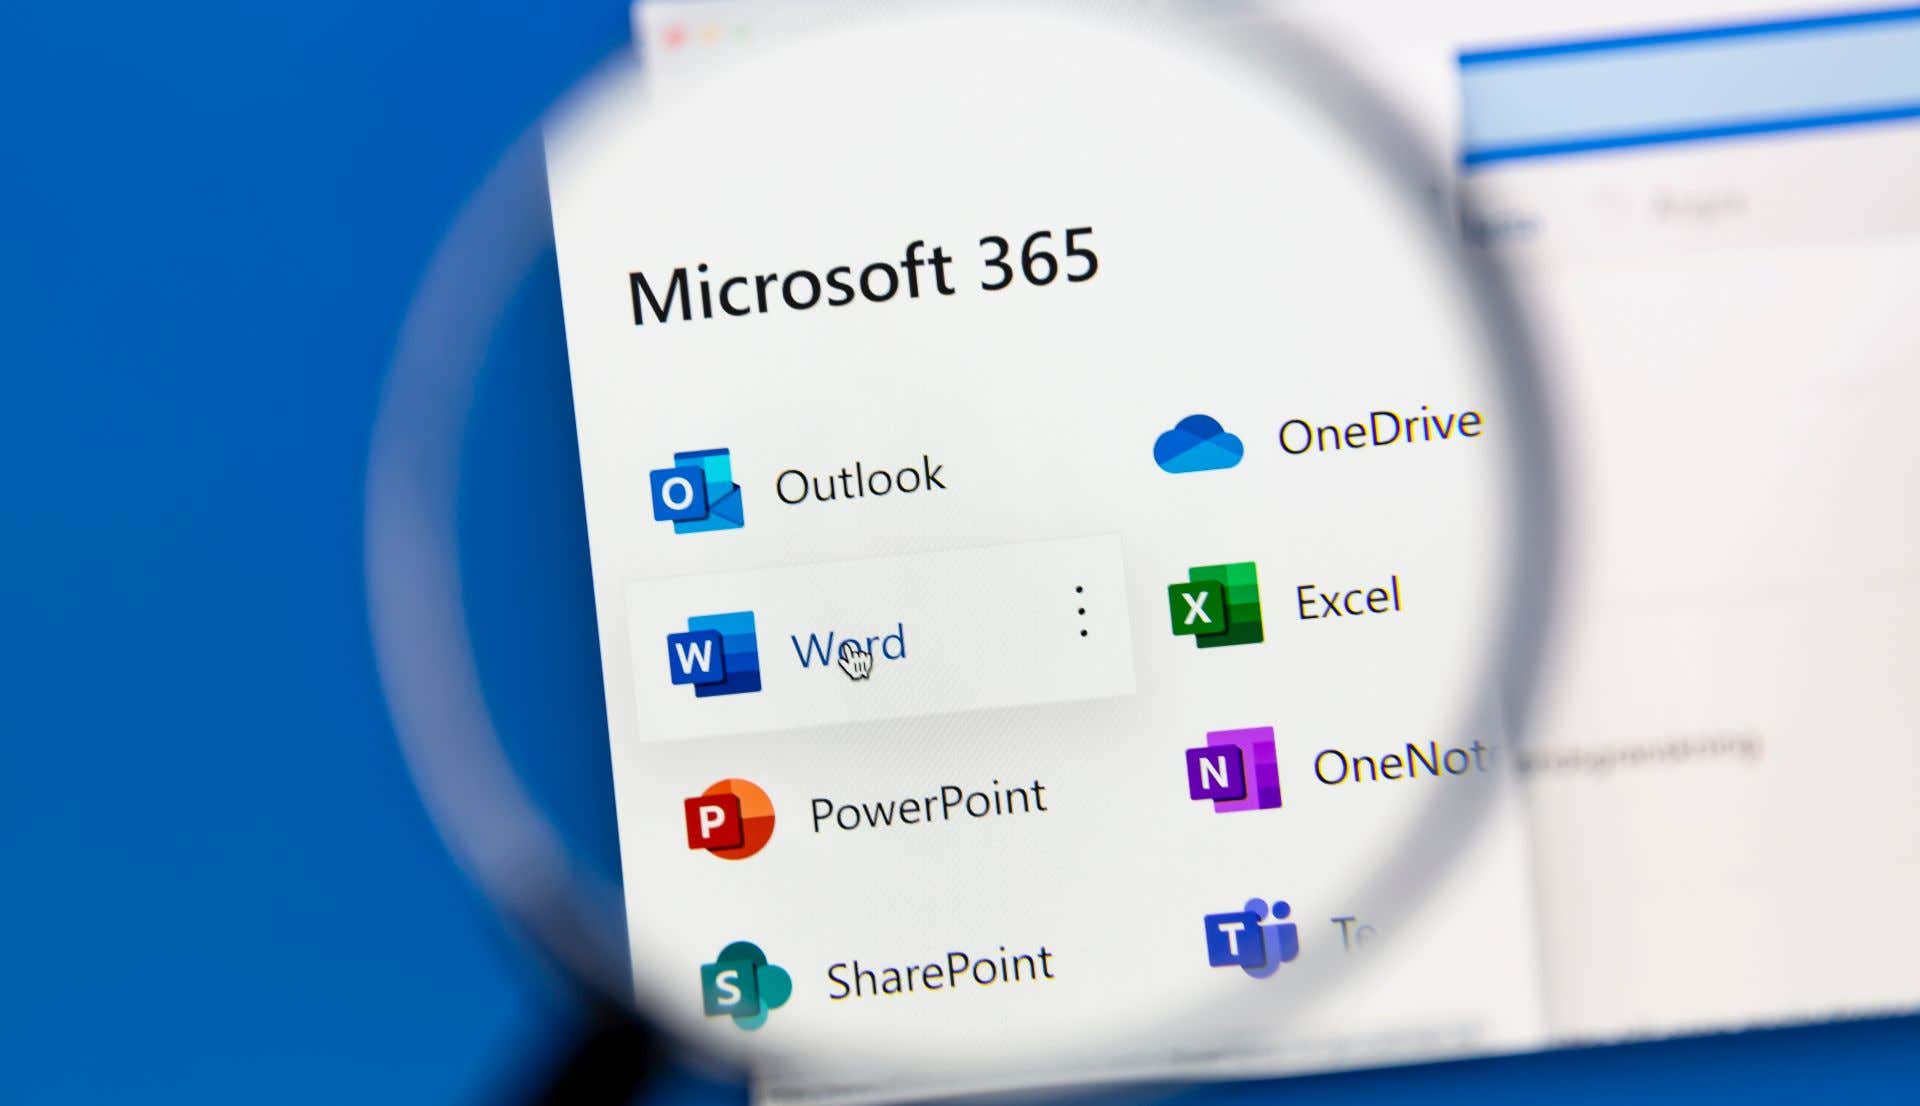 How to install Microsoft Word without the Office 365 suite